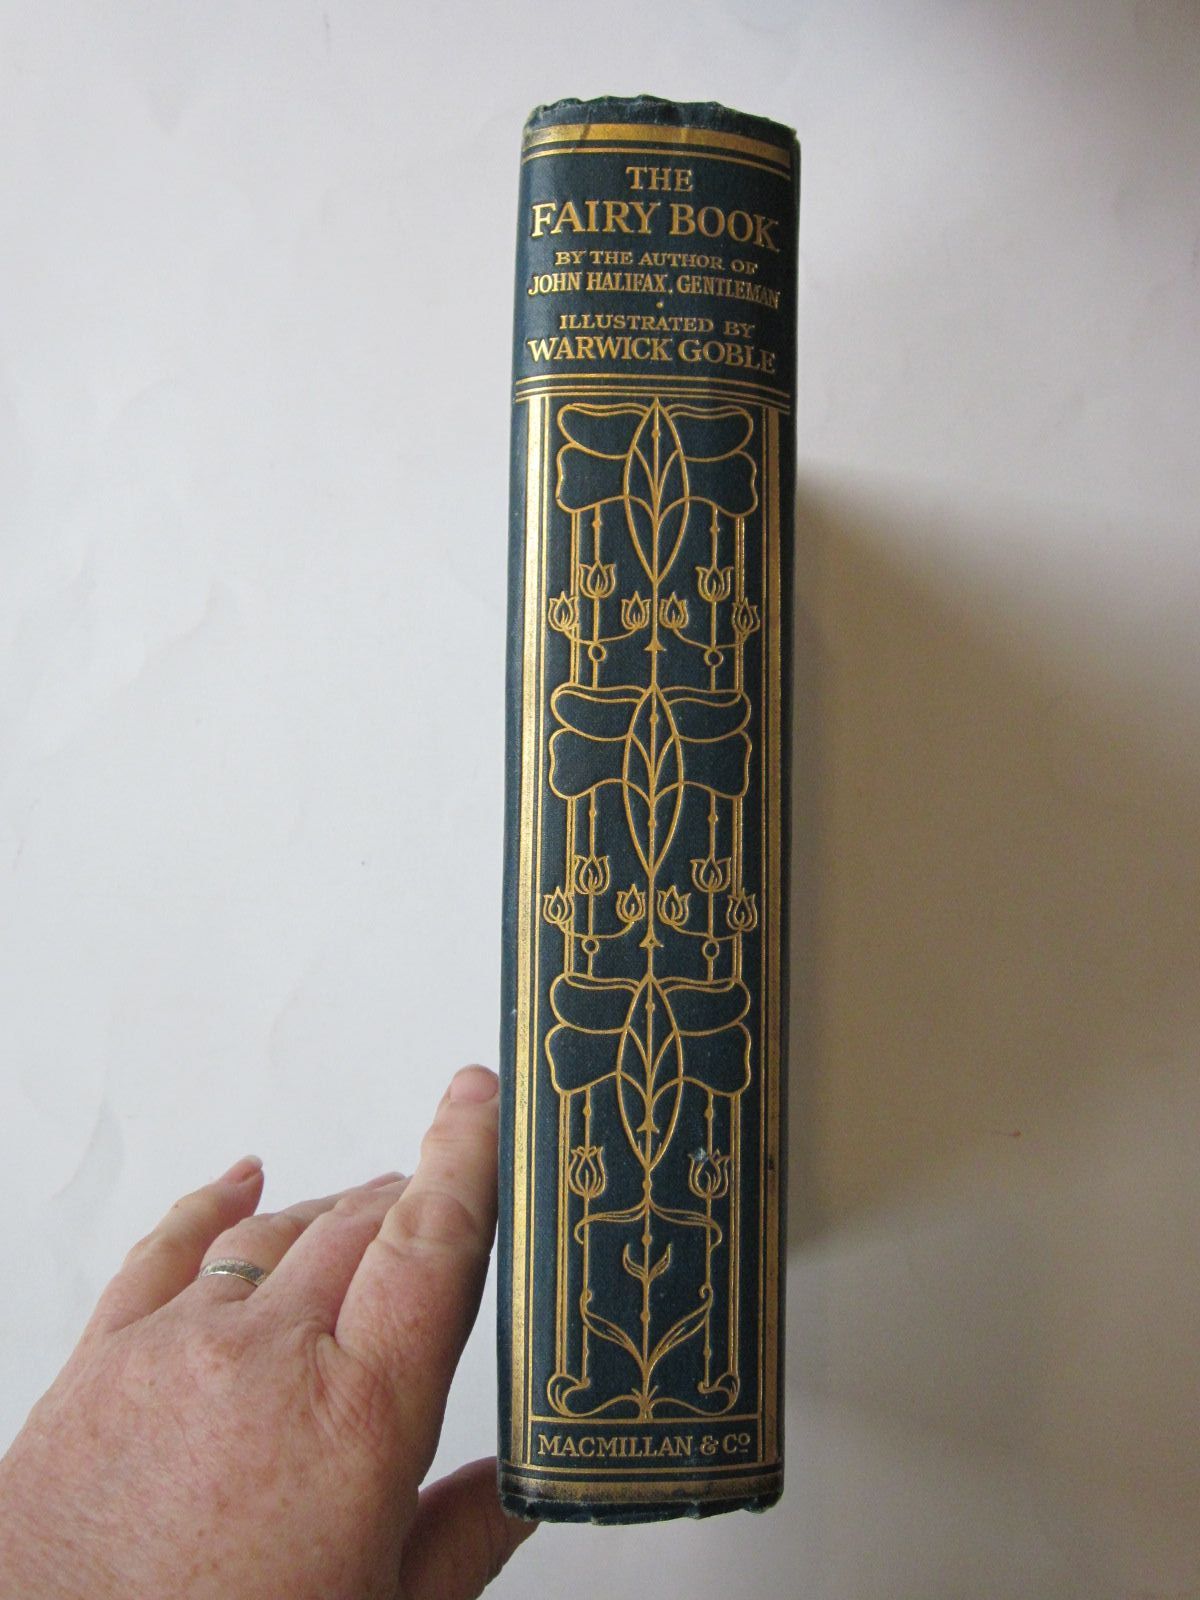 Photo of THE FAIRY BOOK written by Craik, Mrs. Dinah illustrated by Goble, Warwick published by Macmillan & Co. Ltd. (STOCK CODE: 1306490)  for sale by Stella & Rose's Books